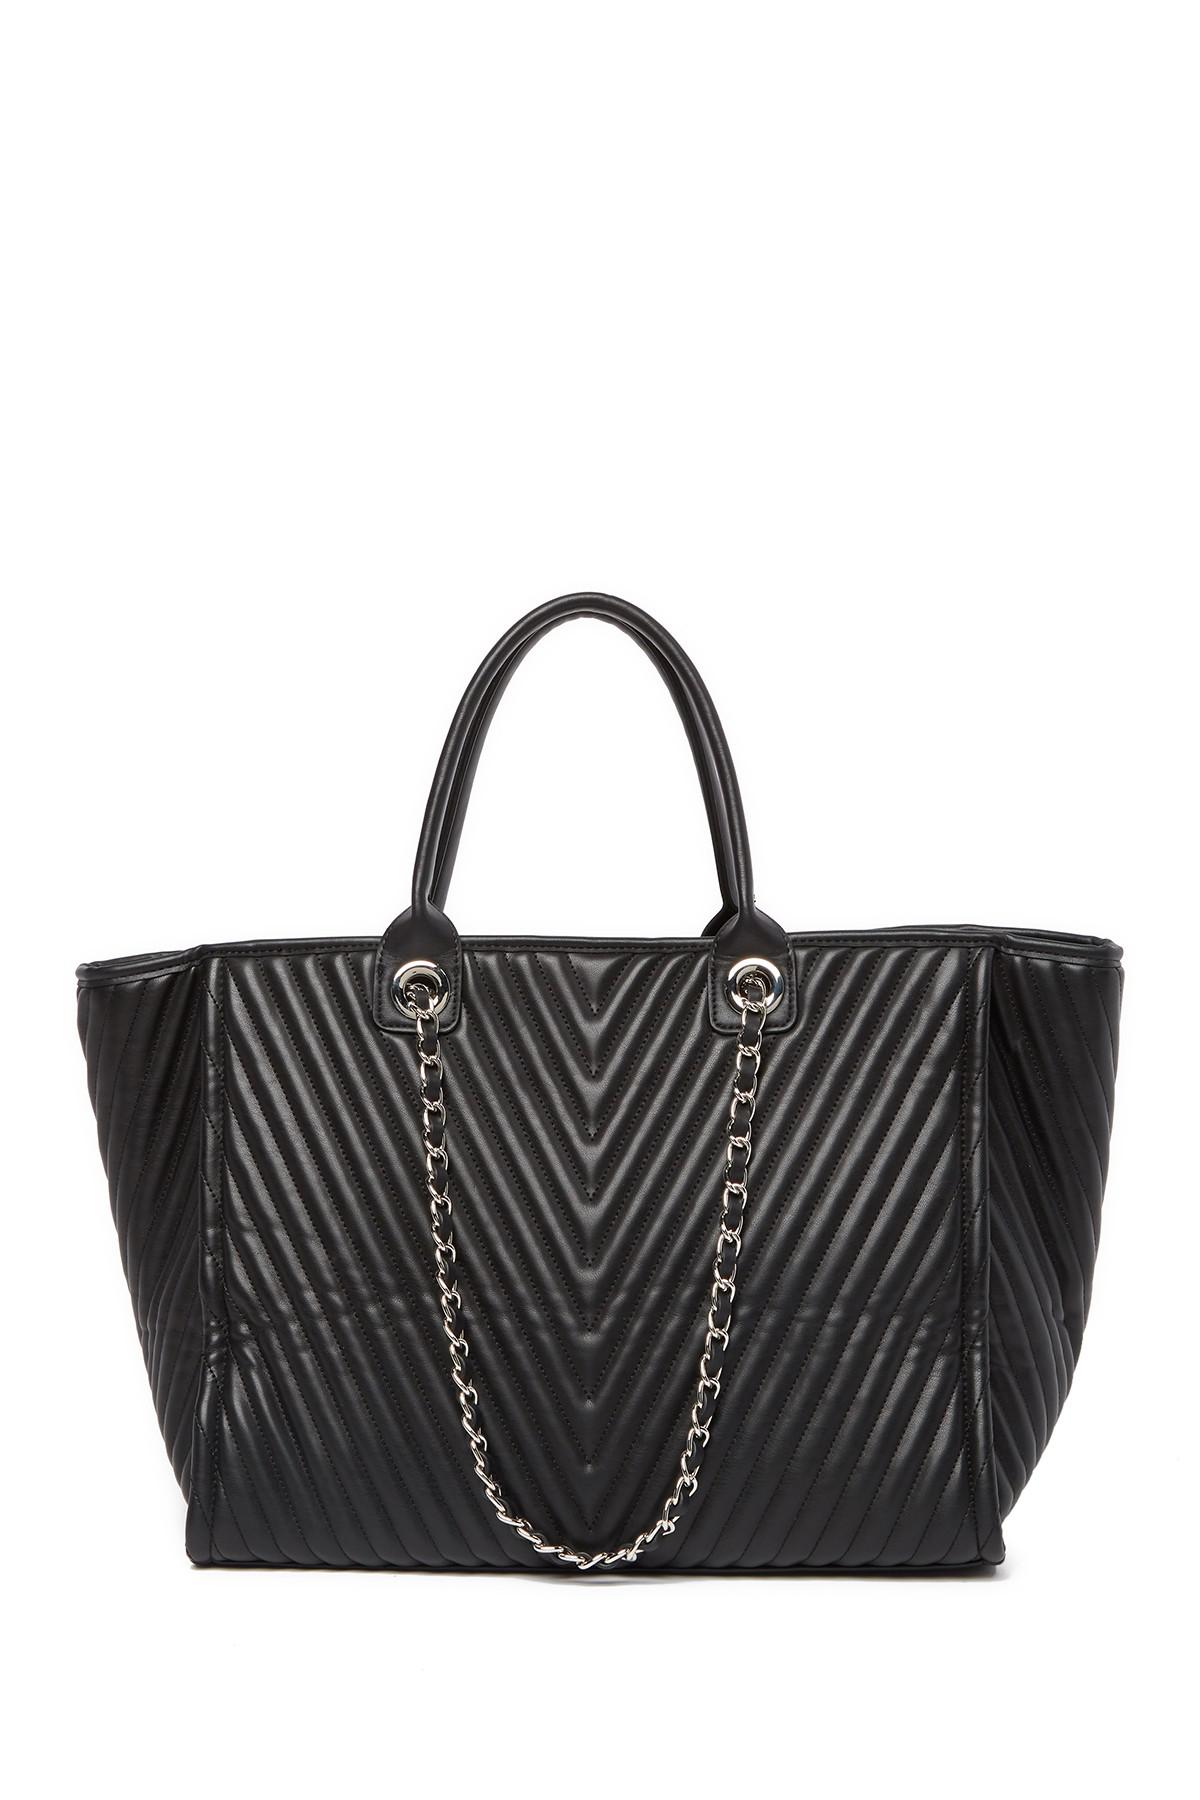 Lyst - Steve Madden Tina Chevron Quilted Large Tote Bag in Black